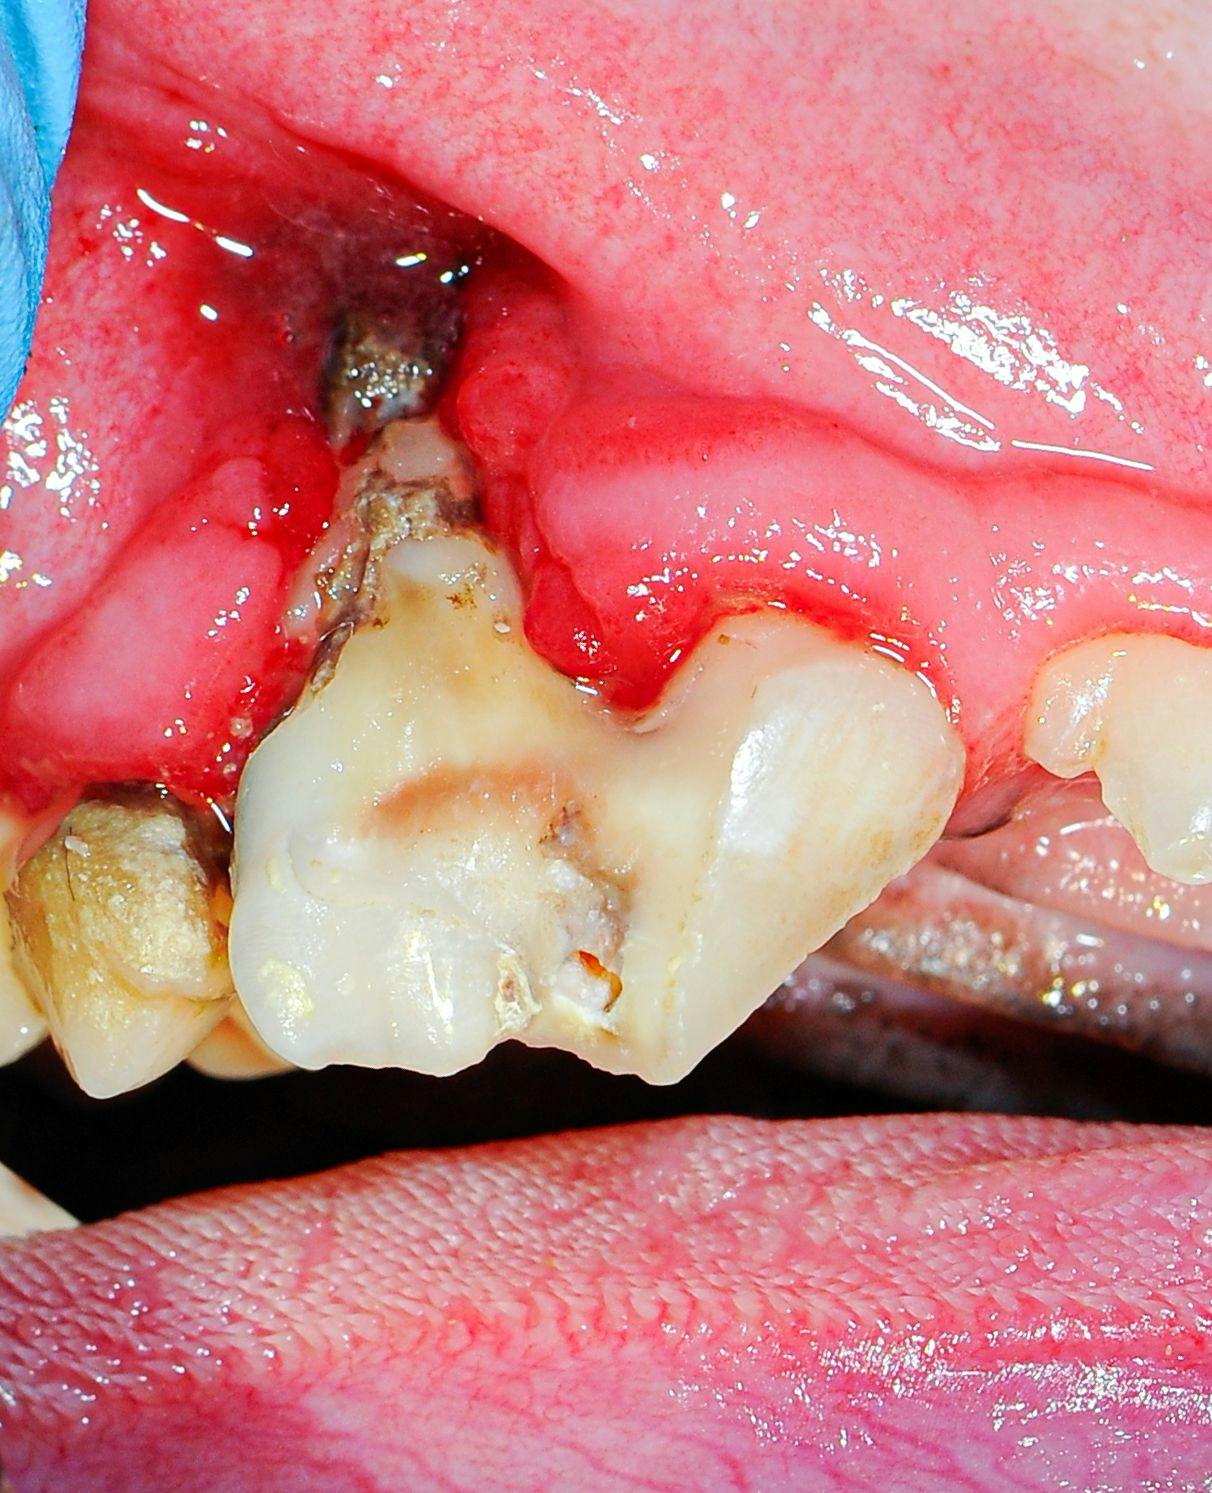 Figure 5: Fractured right maxillary fourth premolar affected with advanced periodontal disease, extraction indicated.